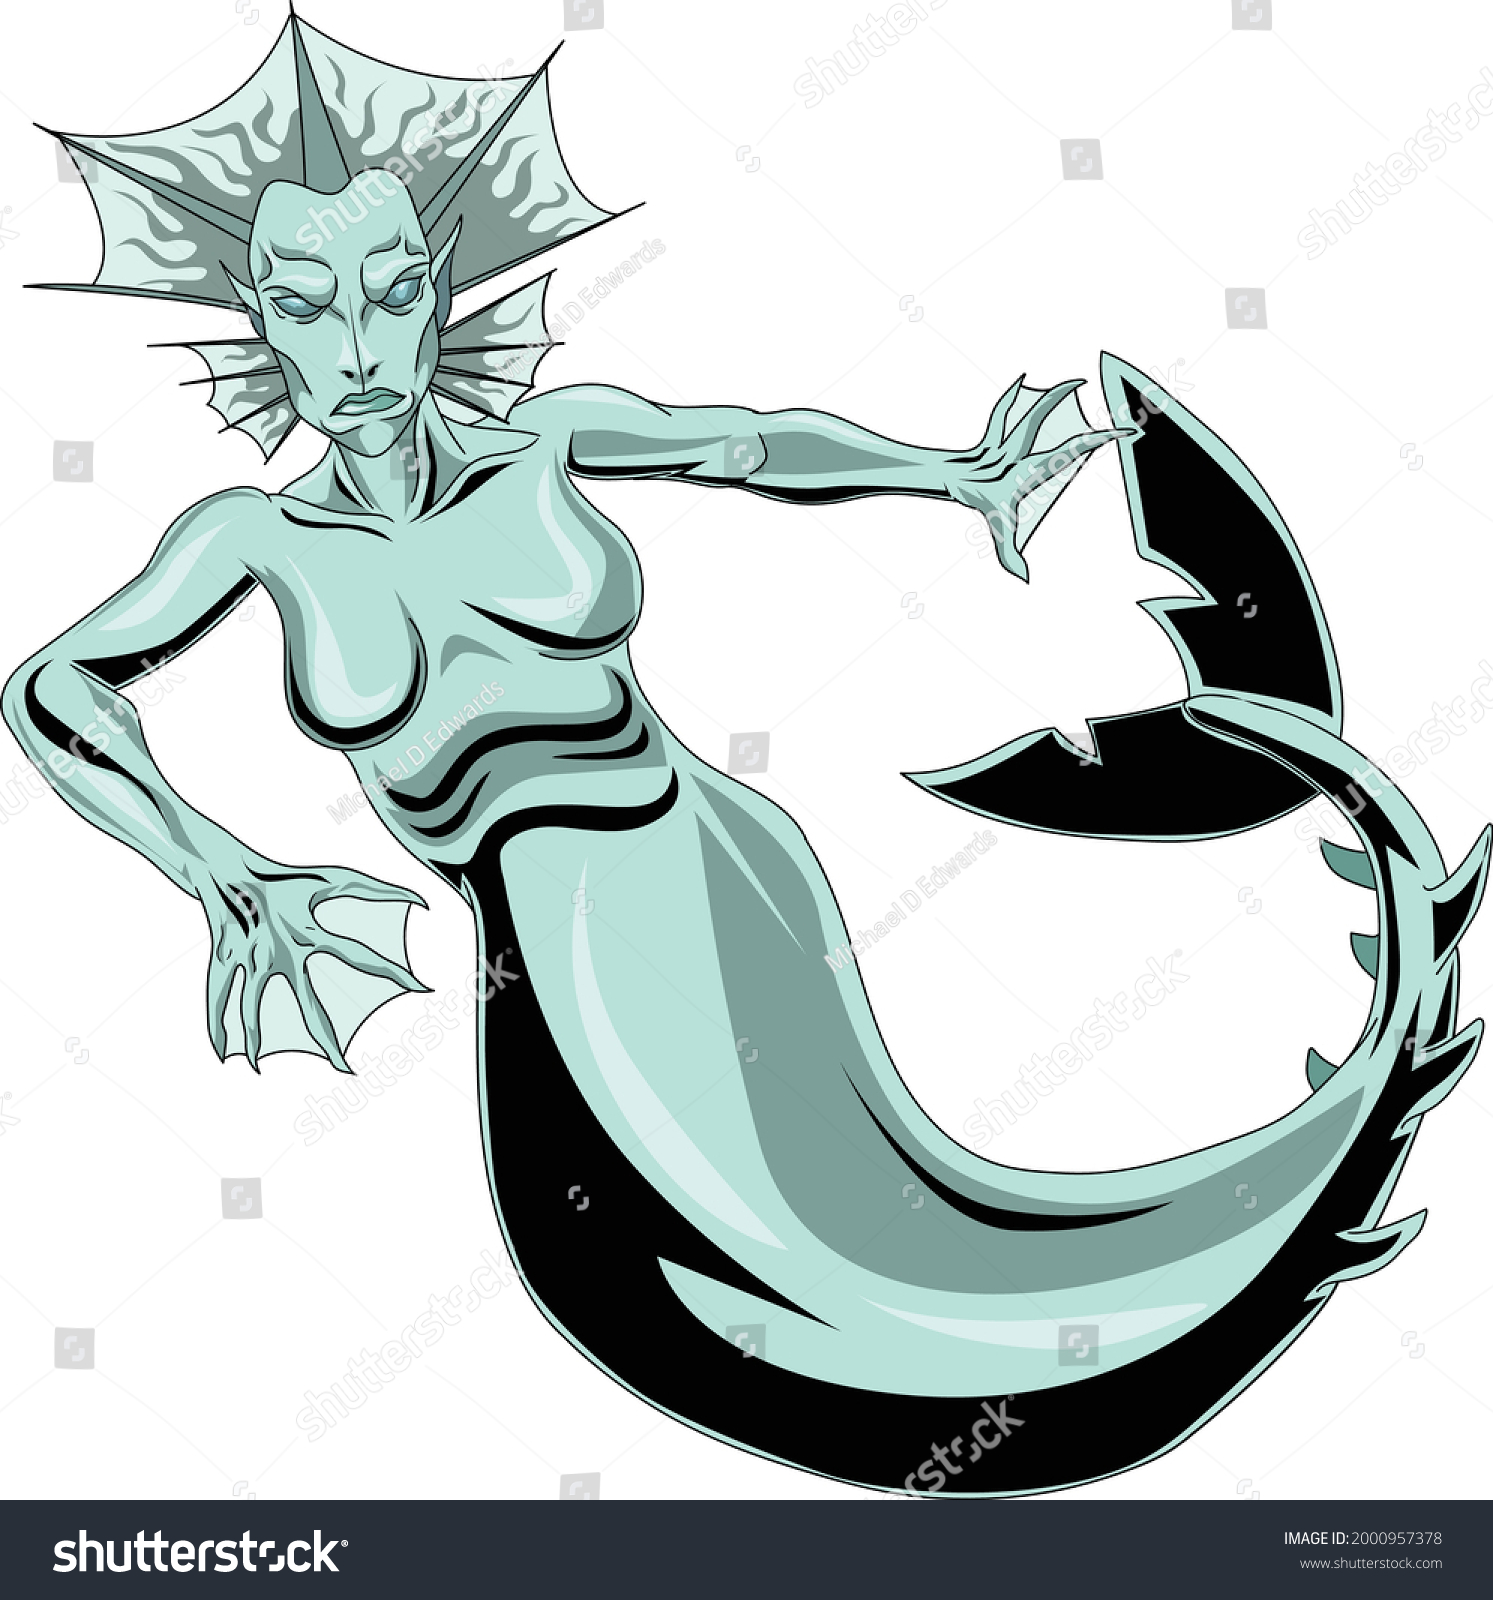 SVG of A Sirena, is a mythological aquatic creature with the head and torso of a human female and the tail of a fish. Philippine mythology. Cartoon style drawing. svg